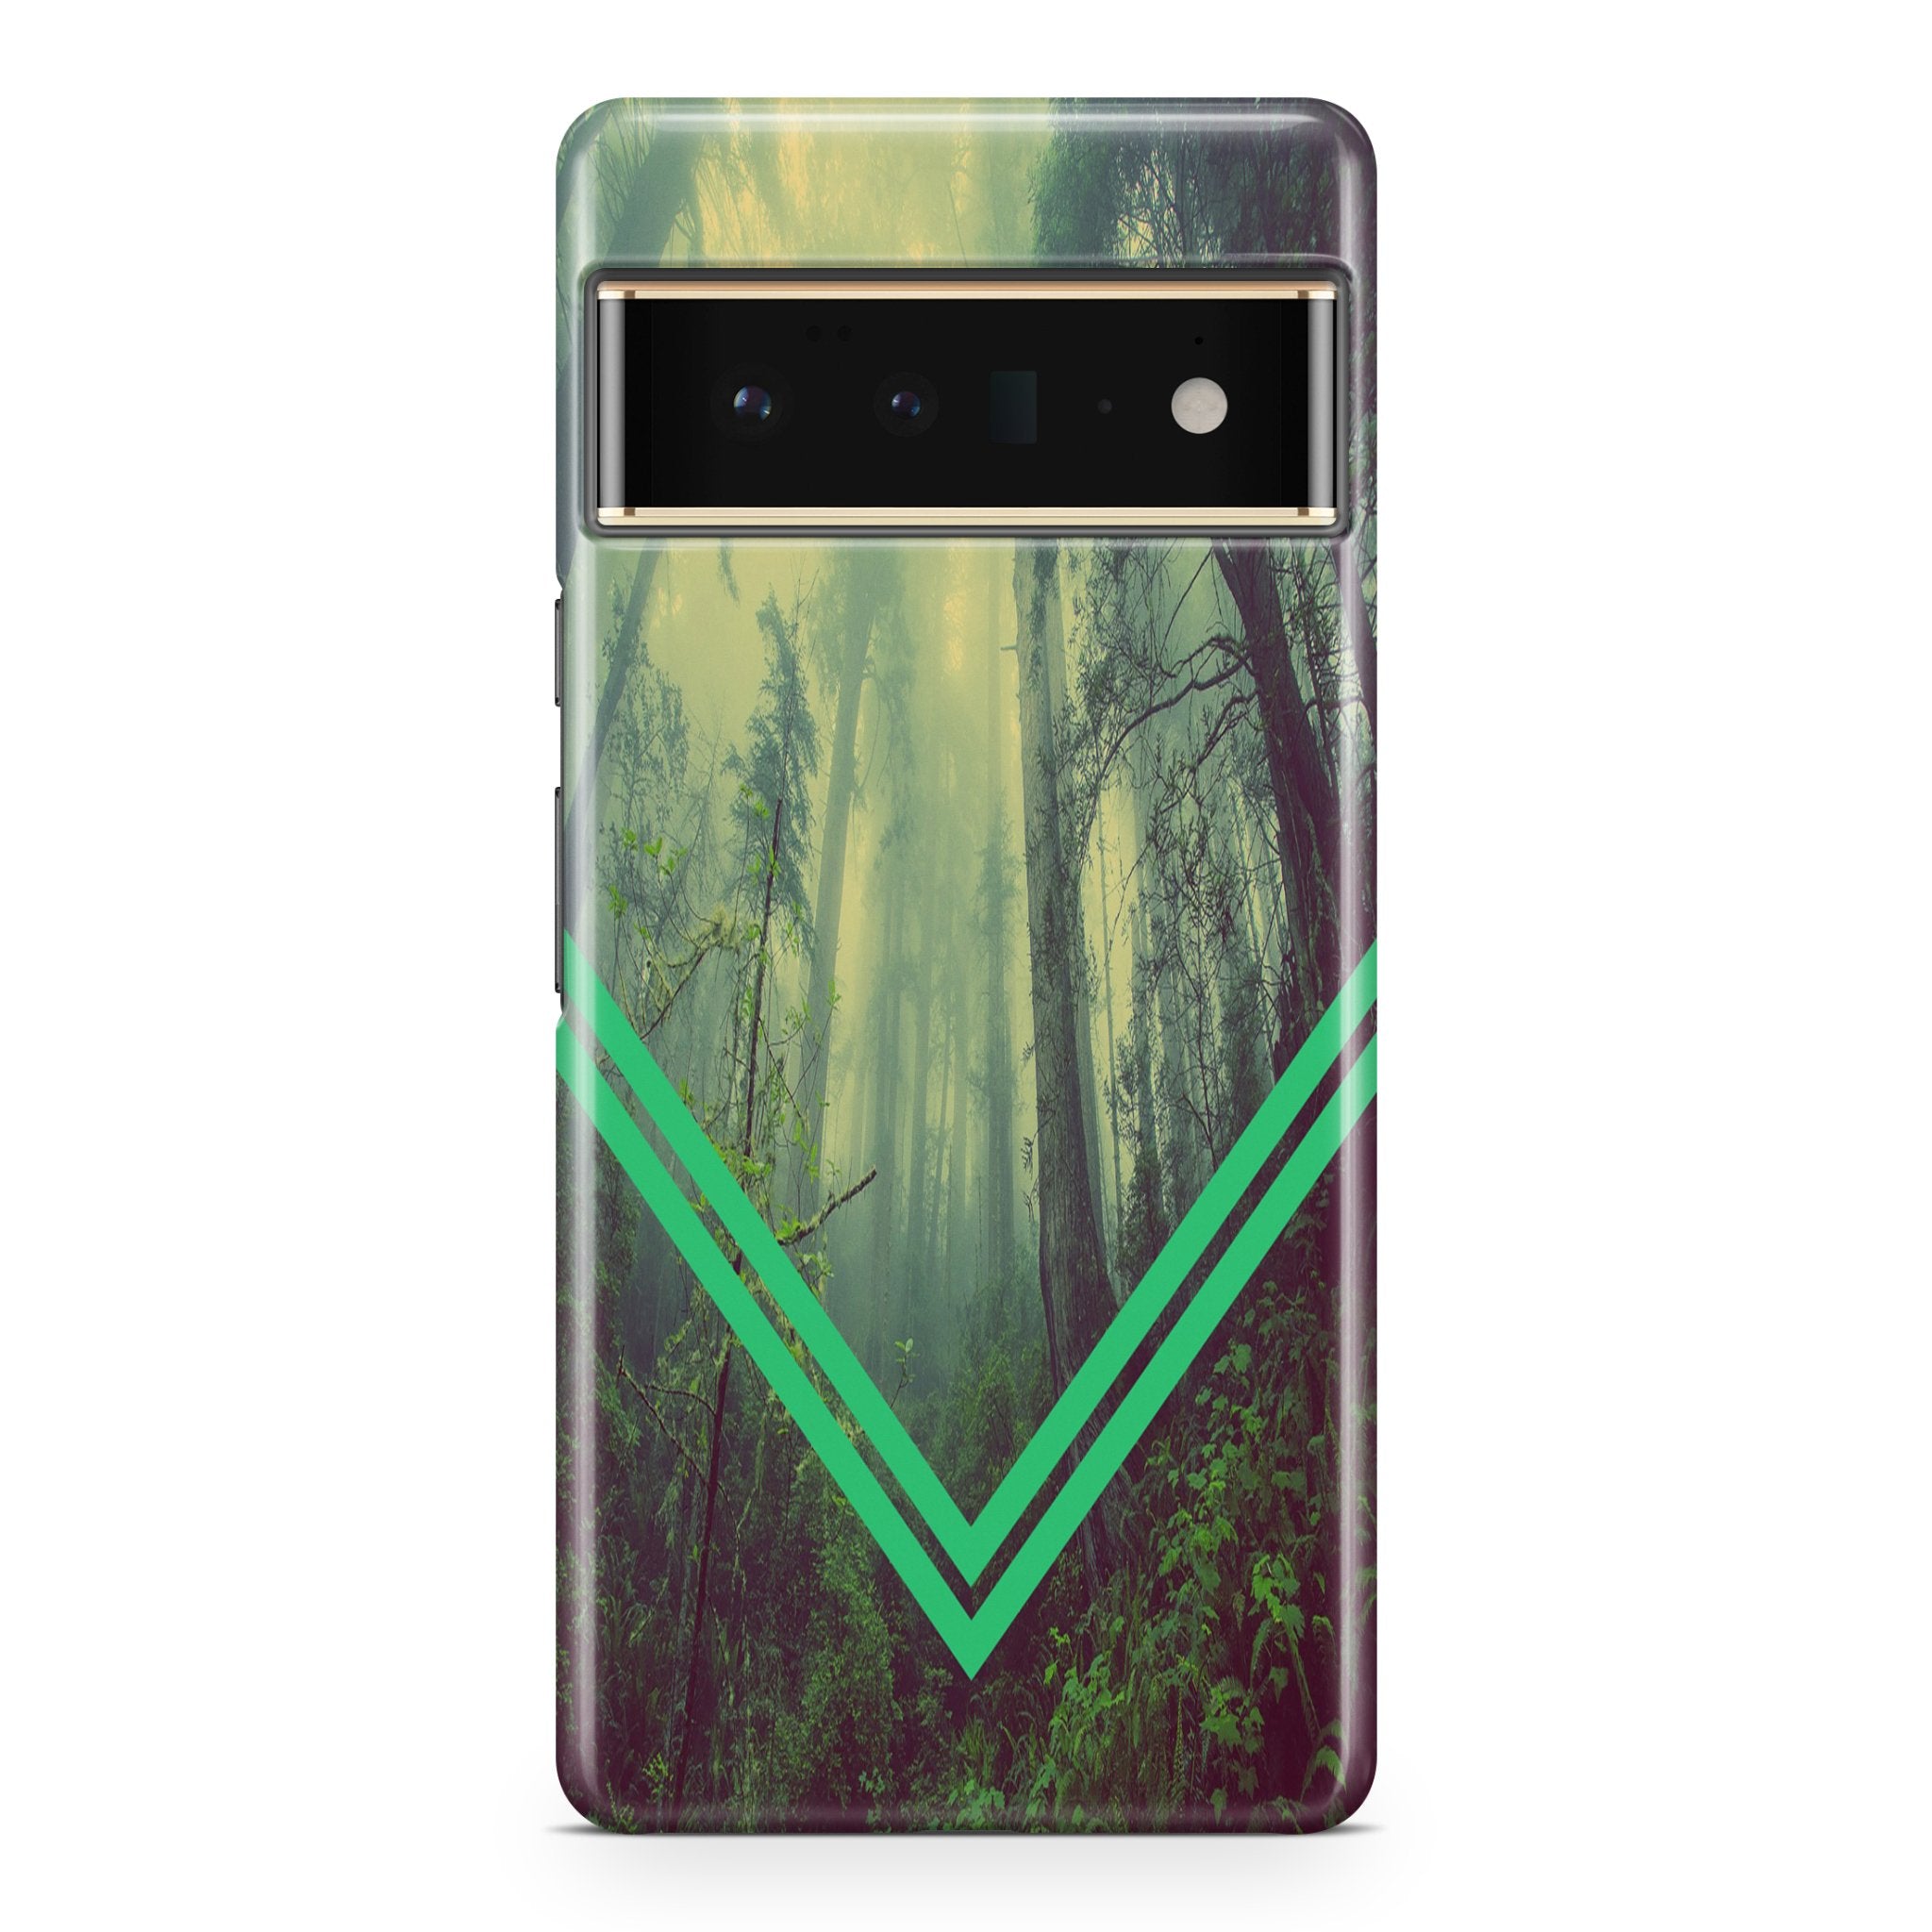 Green Forest - Google phone case designs by CaseSwagger